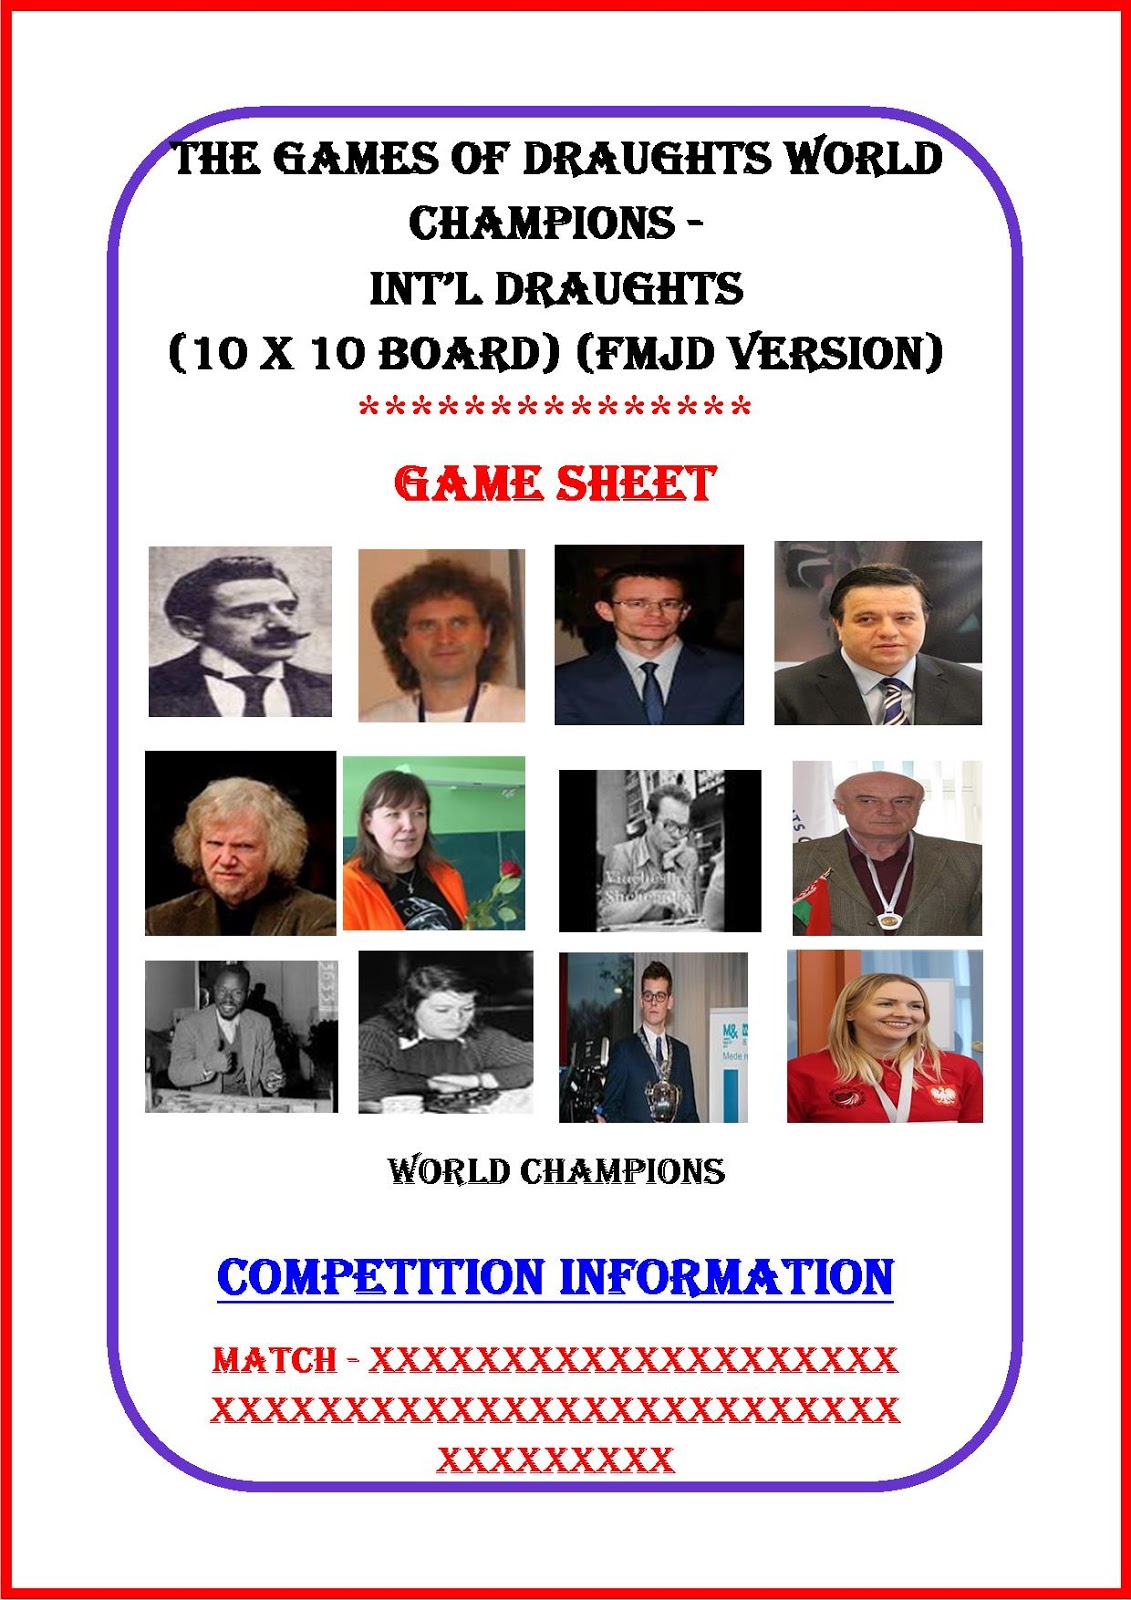 The First online African Draughts-64 Championship was held 27 June